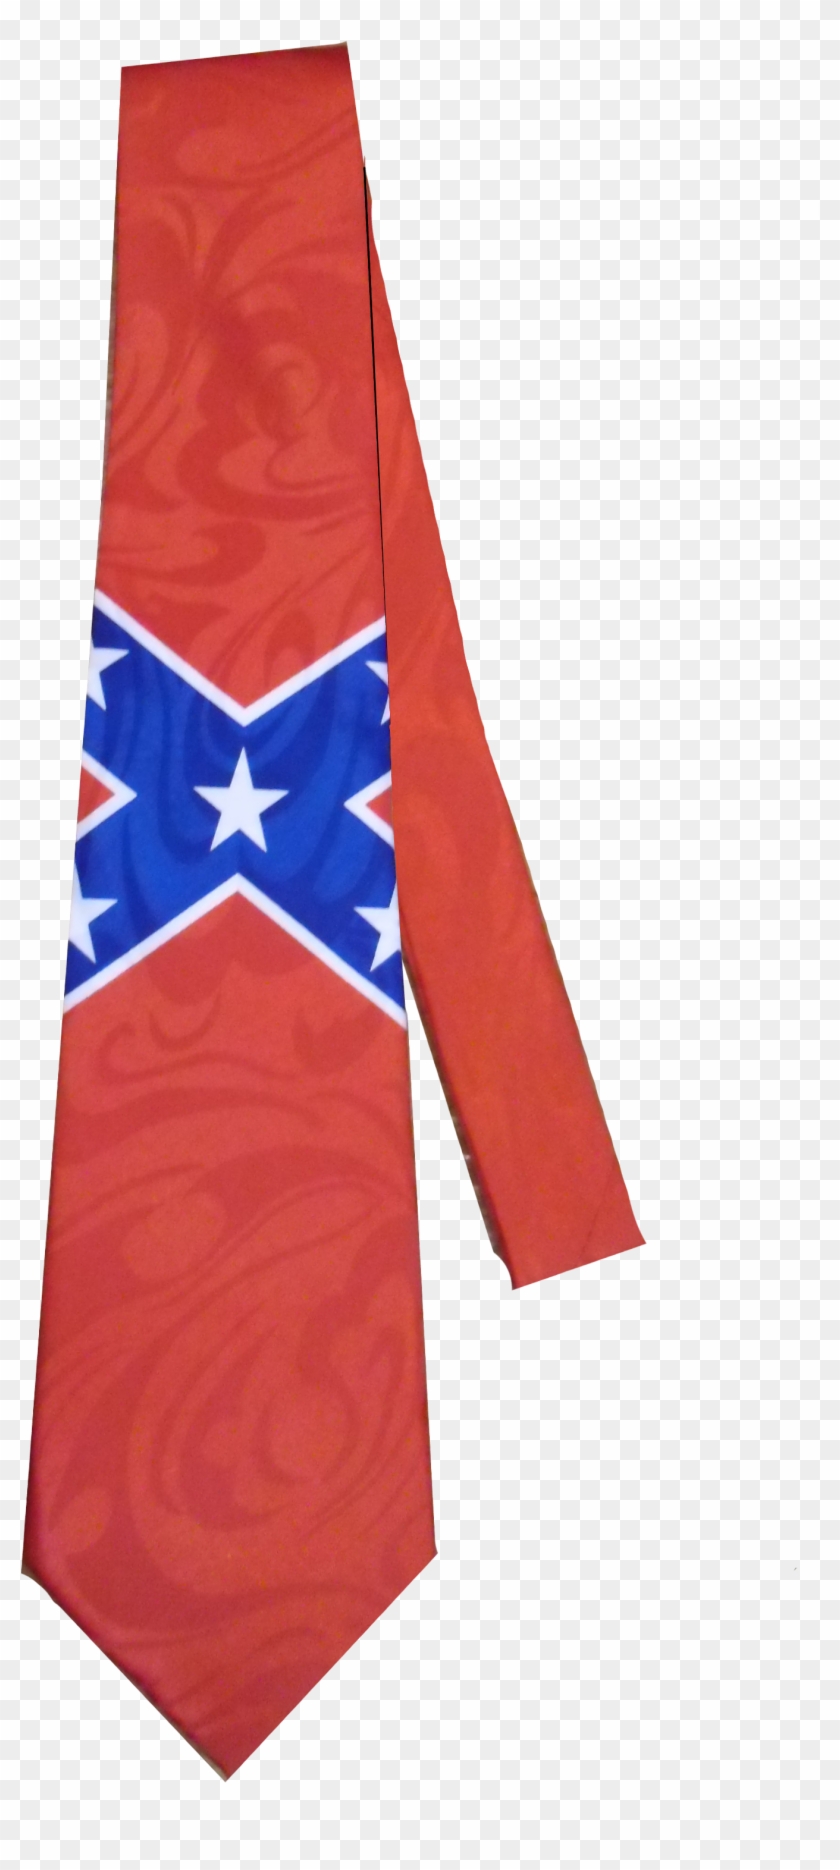 Red Tie With Single Blue Cross And White Stars - Flag Of Georgia #1234642